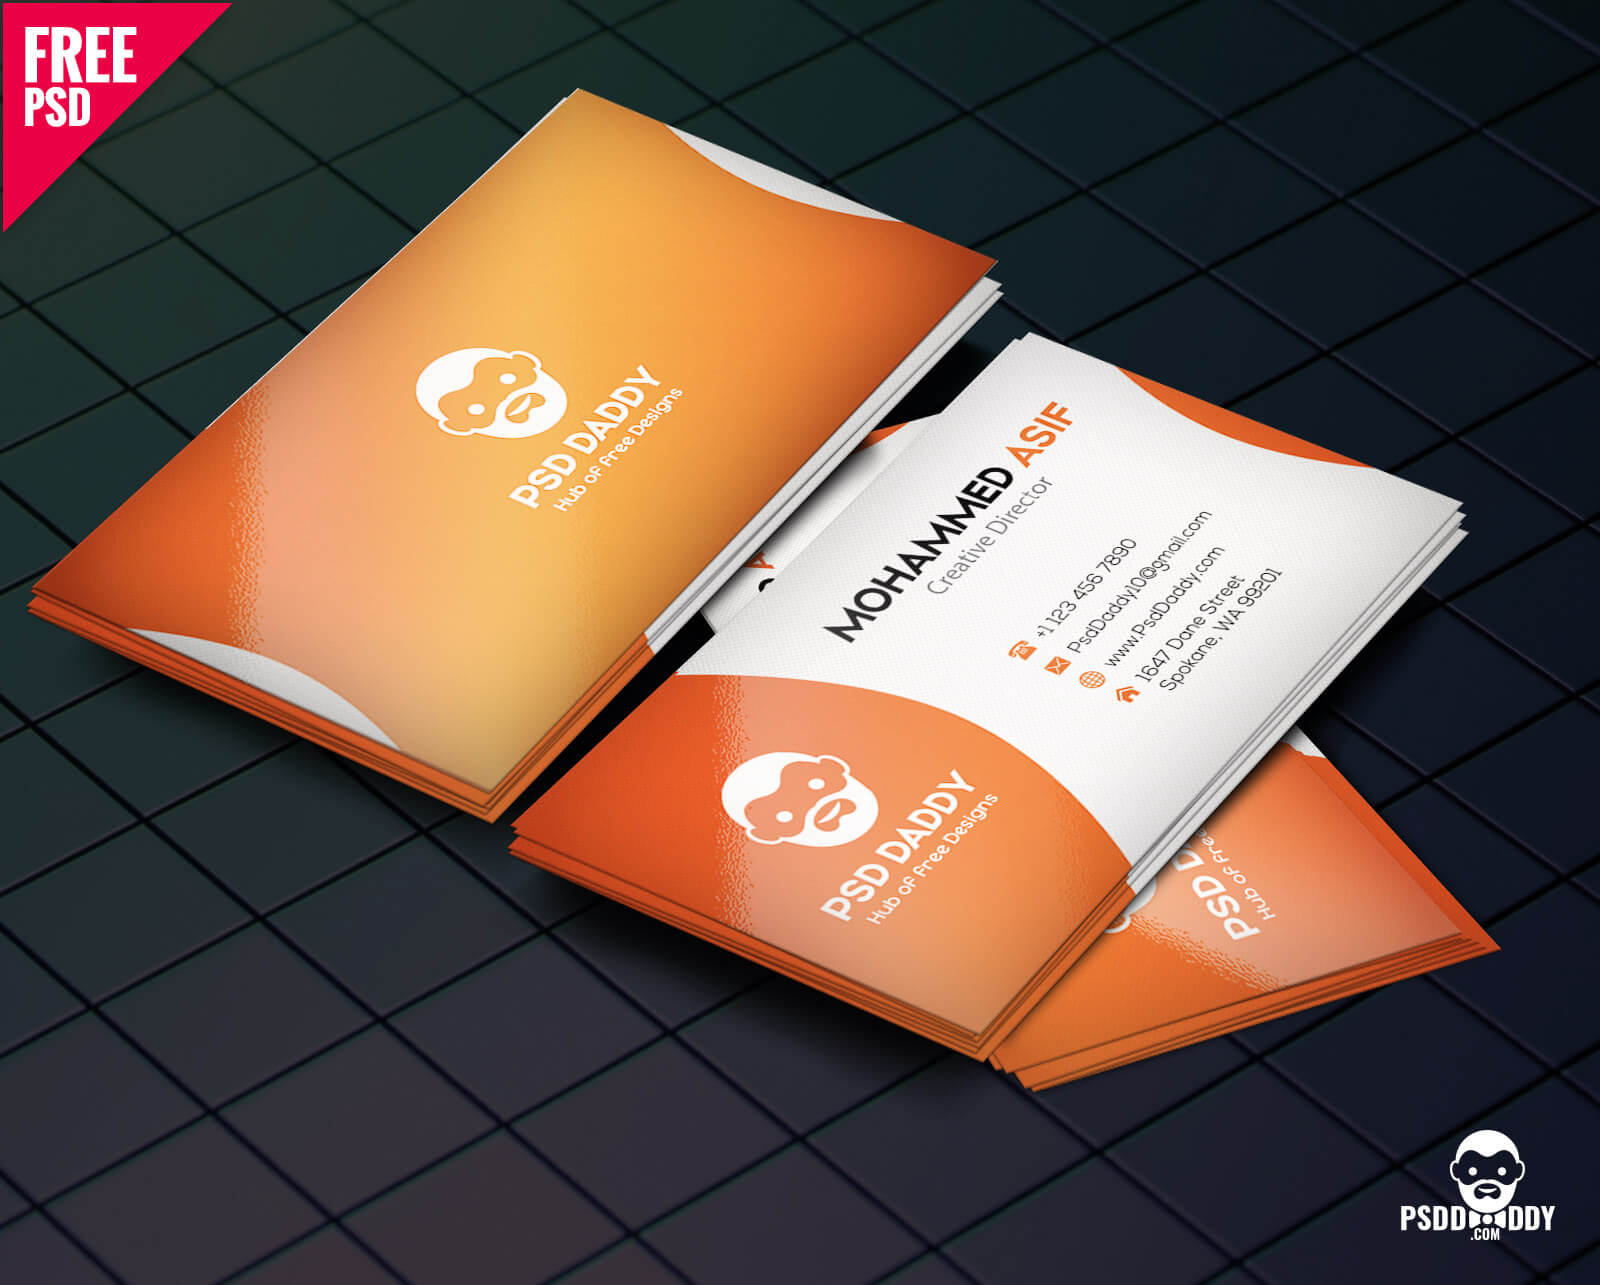 Download] Business Card Design Psd Free | Psddaddy For Visiting Card Psd Template Free Download